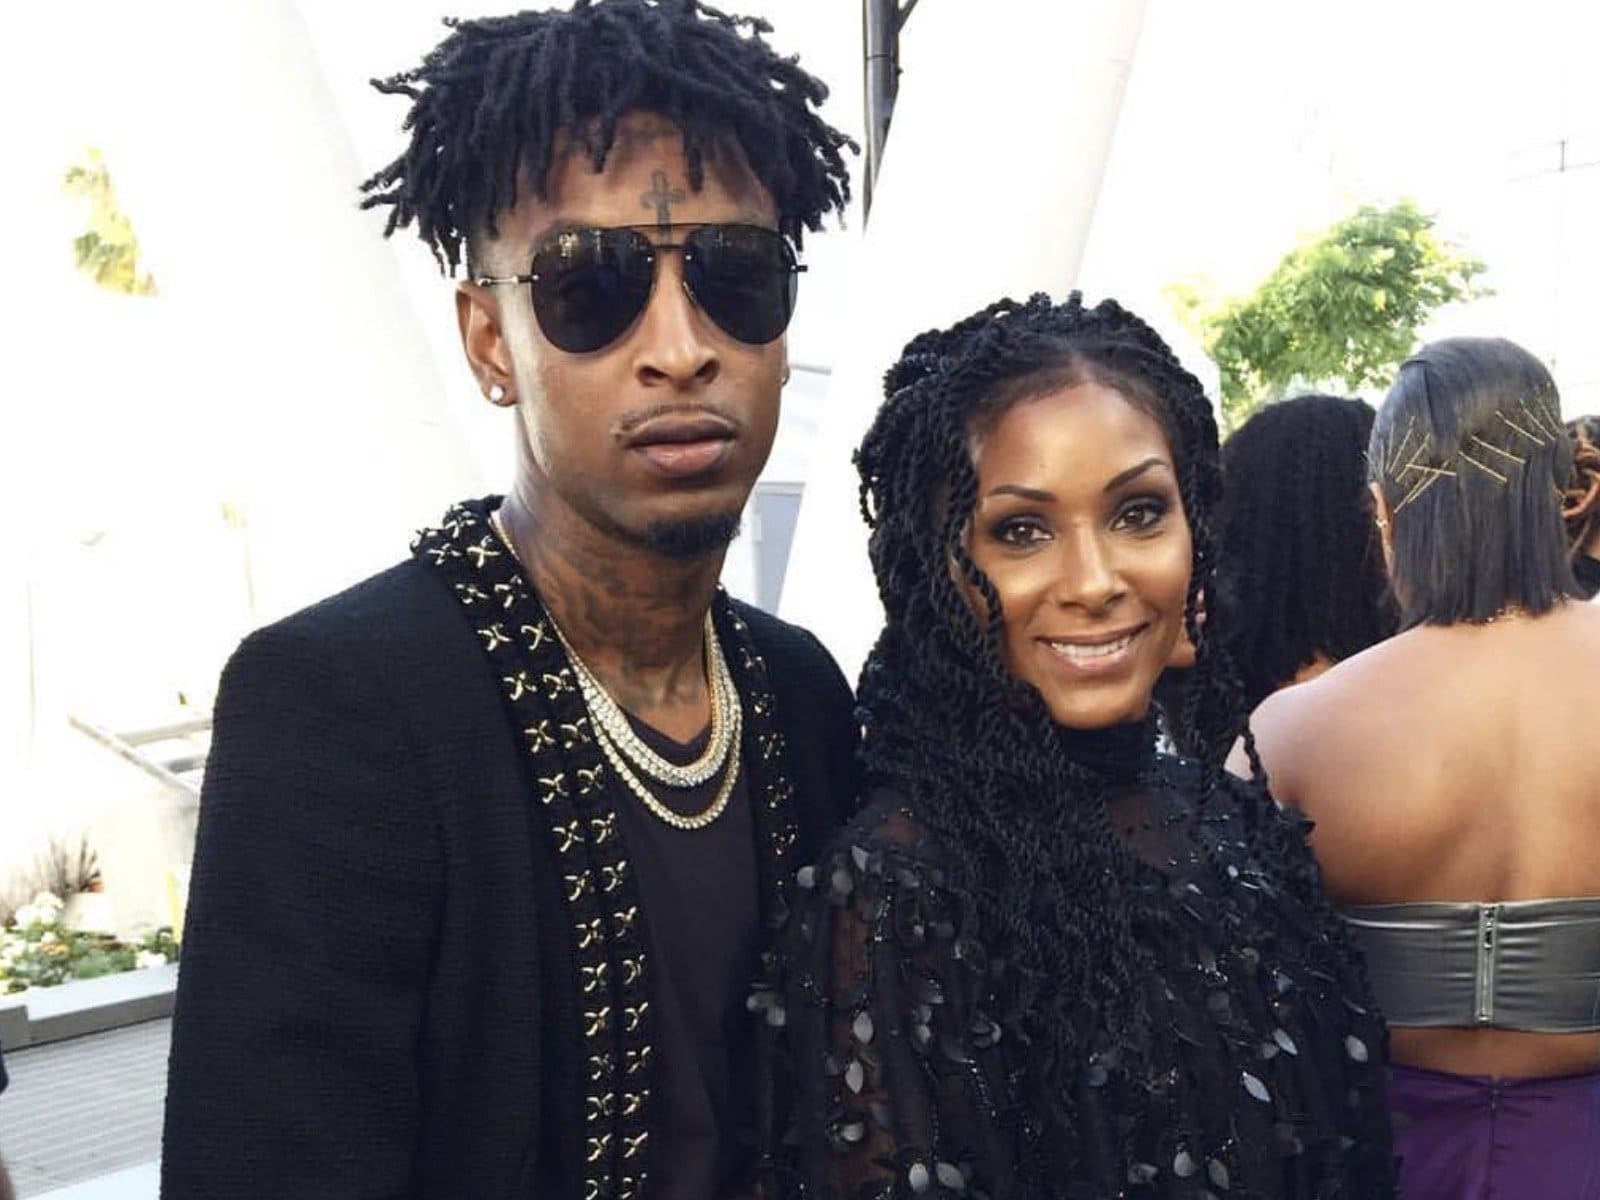 21 Savage Dümps Latto To Go Bck2️⃣His Wife❓BlueFace Wish BM Jaidyn Happy  Mothers Day & Dïss Chrisean 